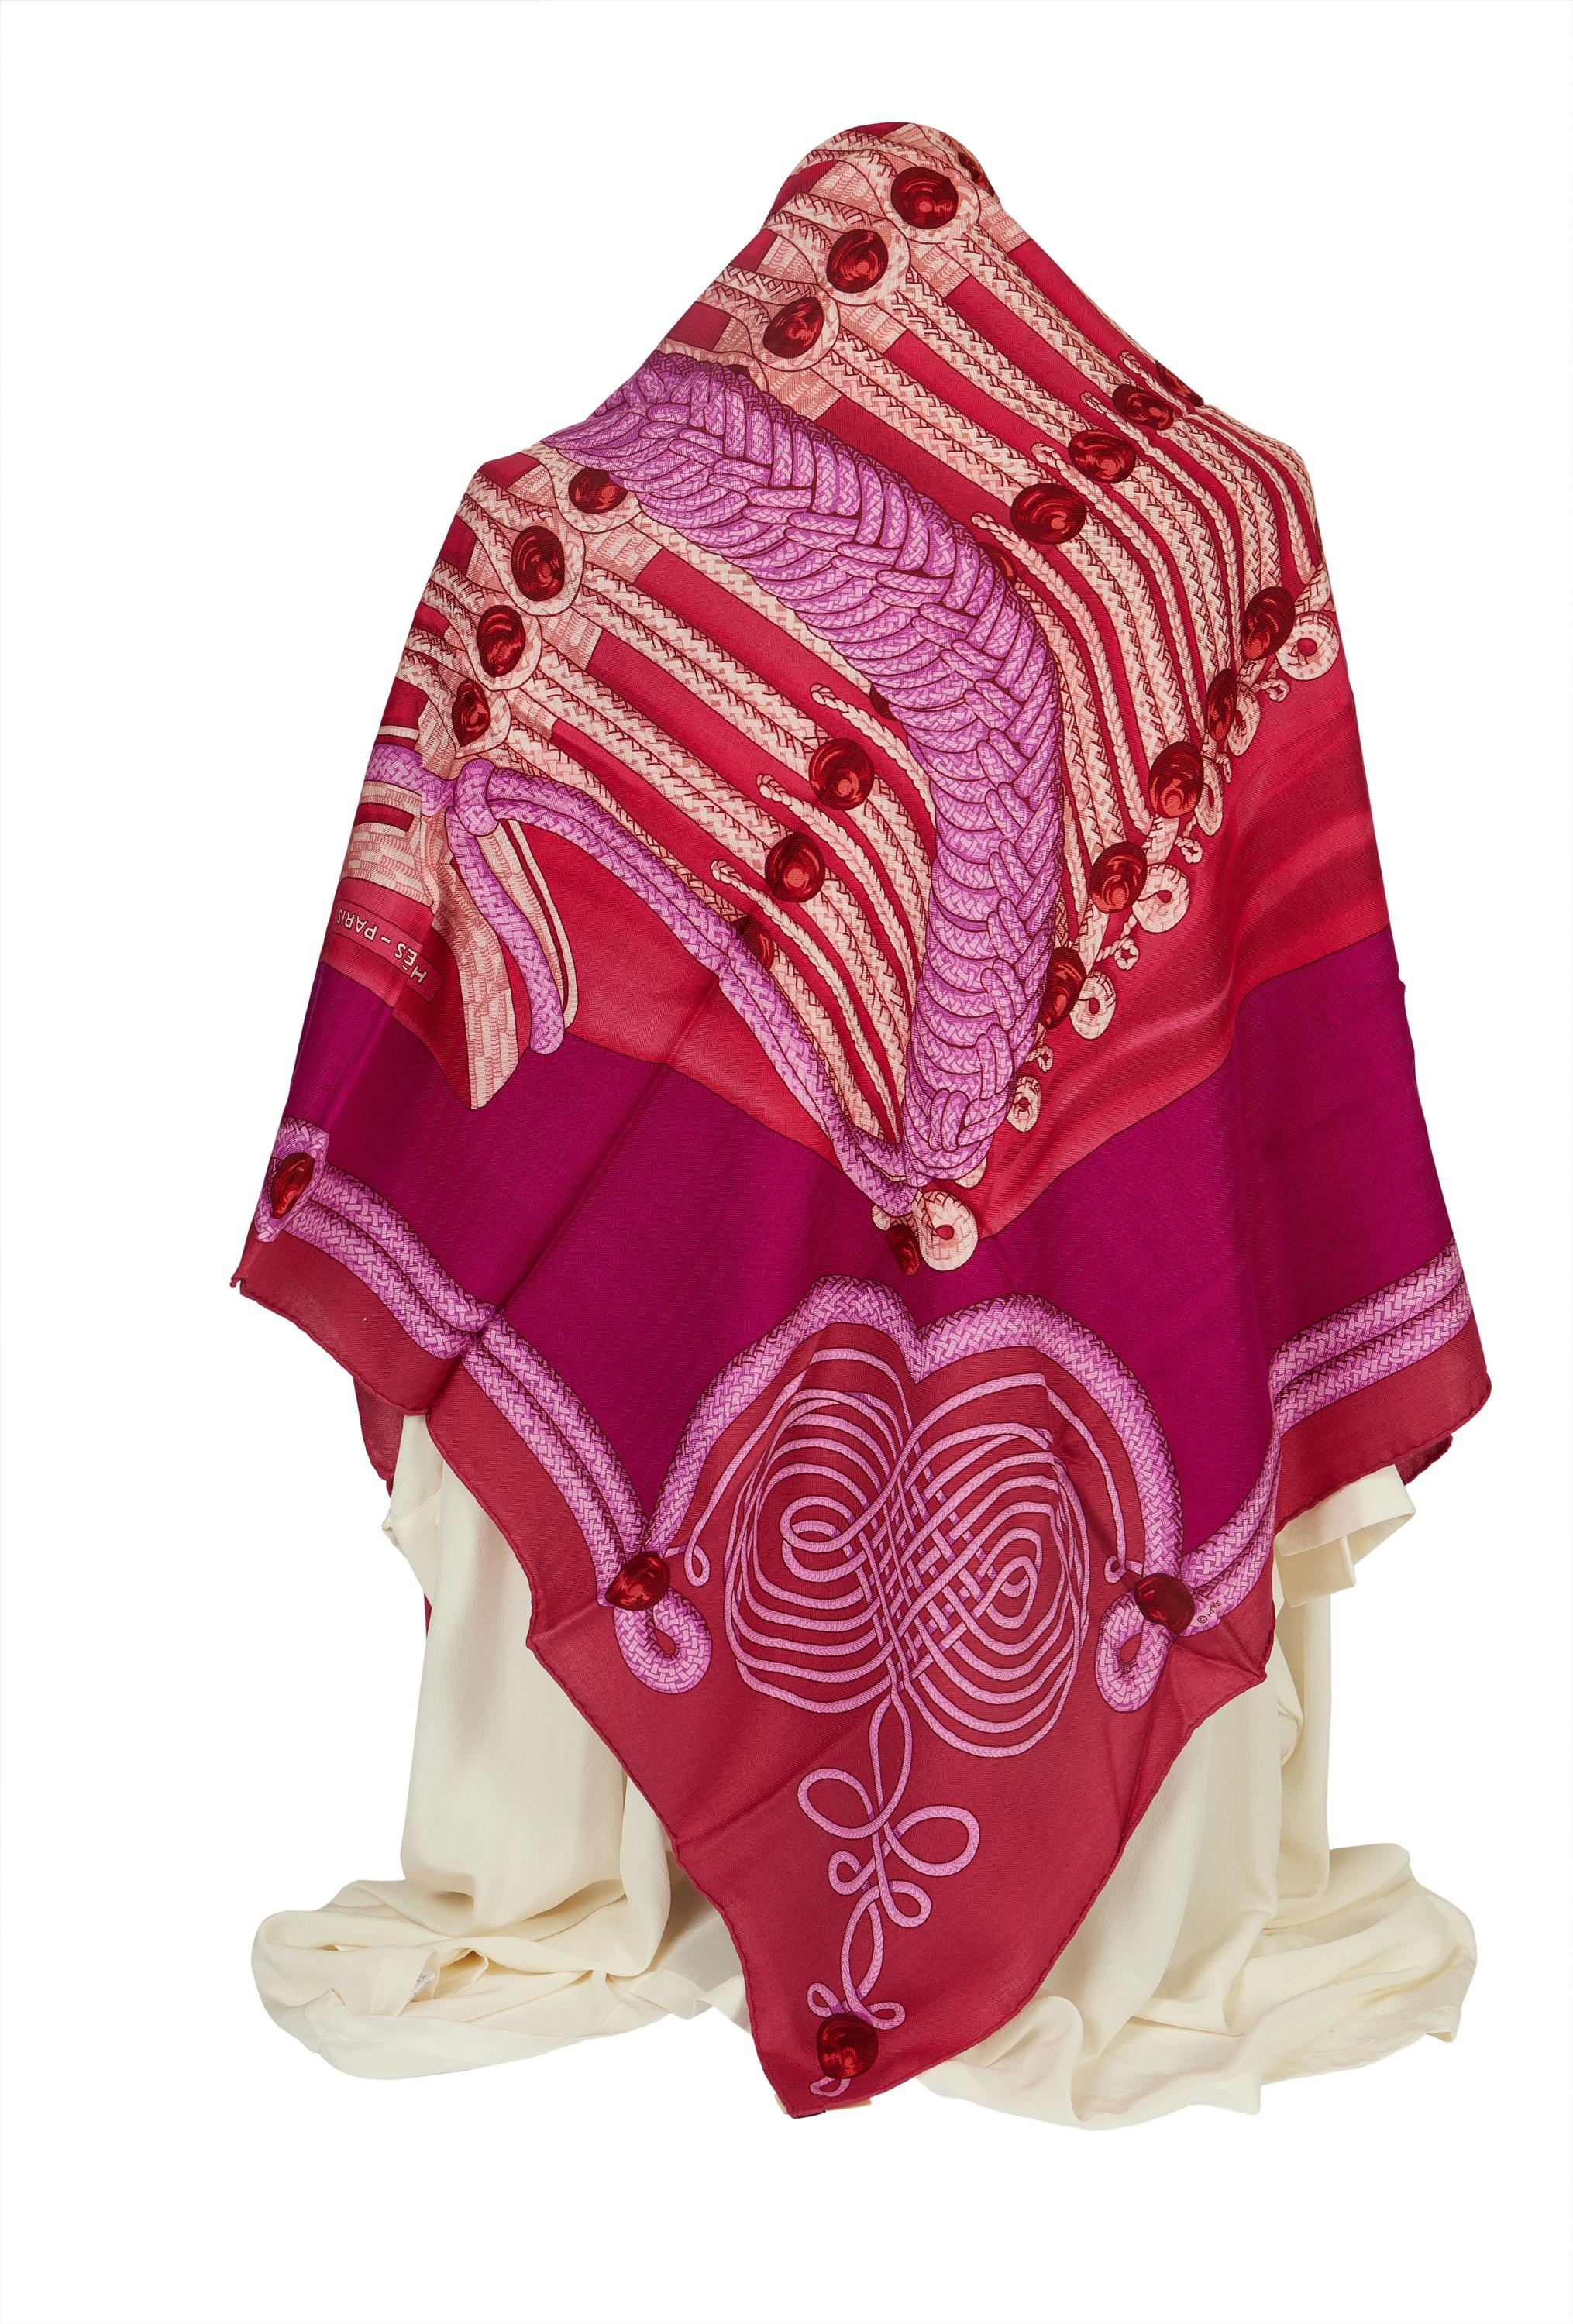 This Hermès Brandebourgs cashmere and silk shawl comes in a beautiful bright pink tone. It is in excellent condition and has no stains. This scarf is perfect for the winter as well for colder summer nights to have something over the shoulders.